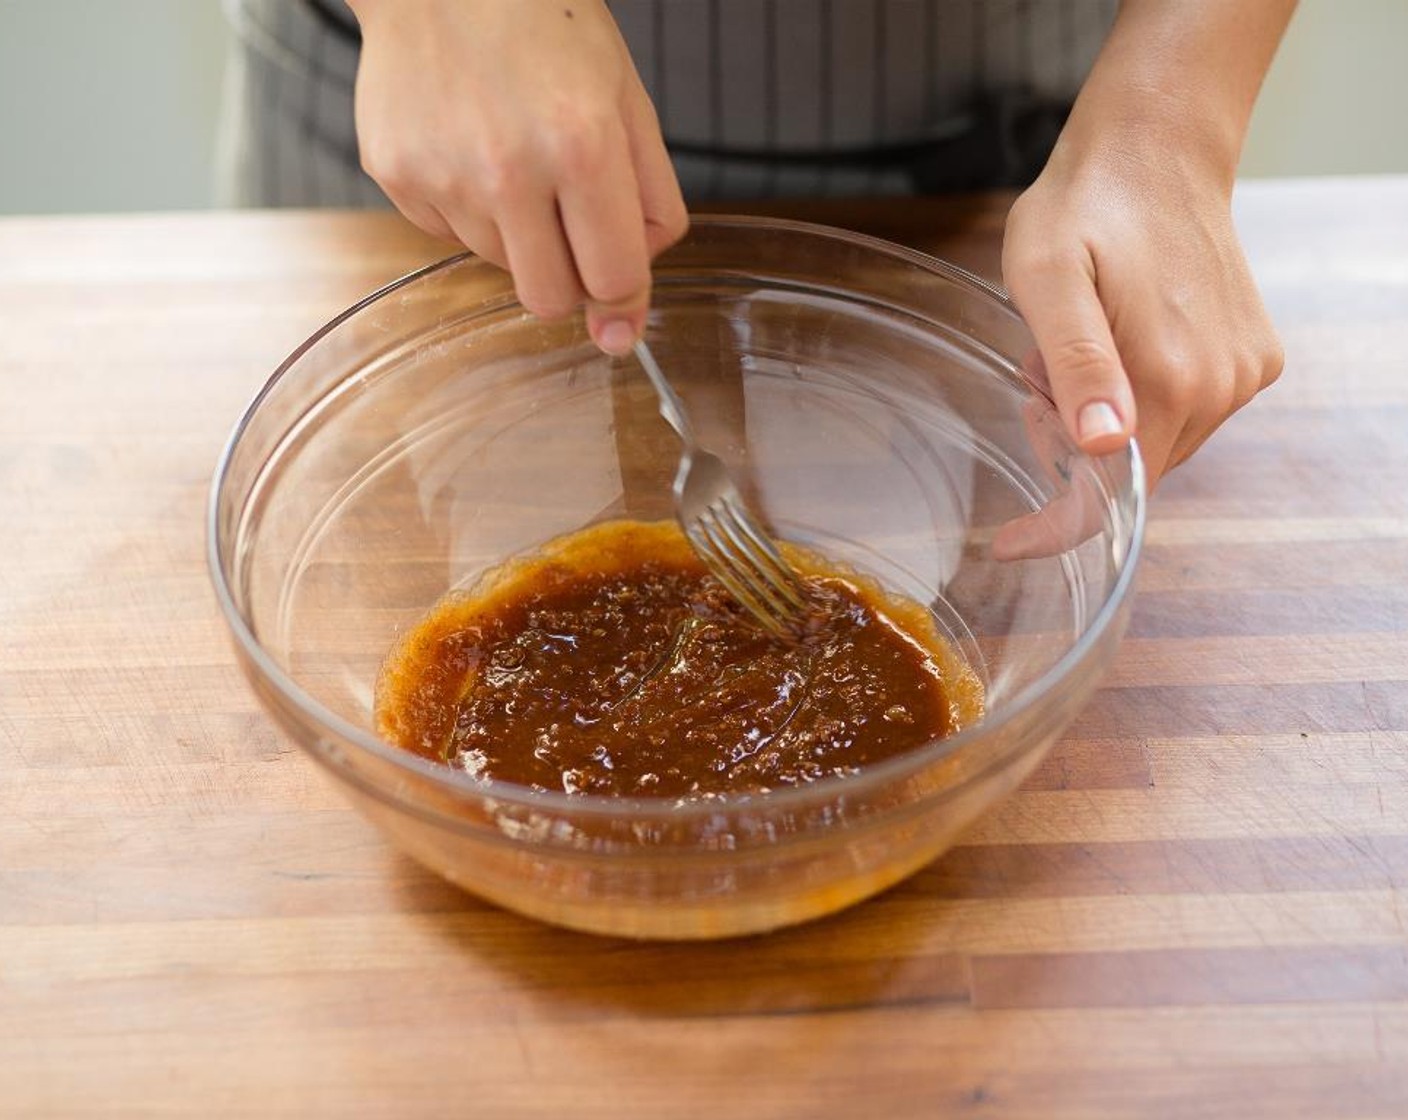 step 6 In a large bowl, whisk together Teriyaki Sauce (1/4 cup), Peanut Butter (1/4 cup), Rice Vinegar (1/2 Tbsp), and Sriracha (1/2 Tbsp) until smooth.